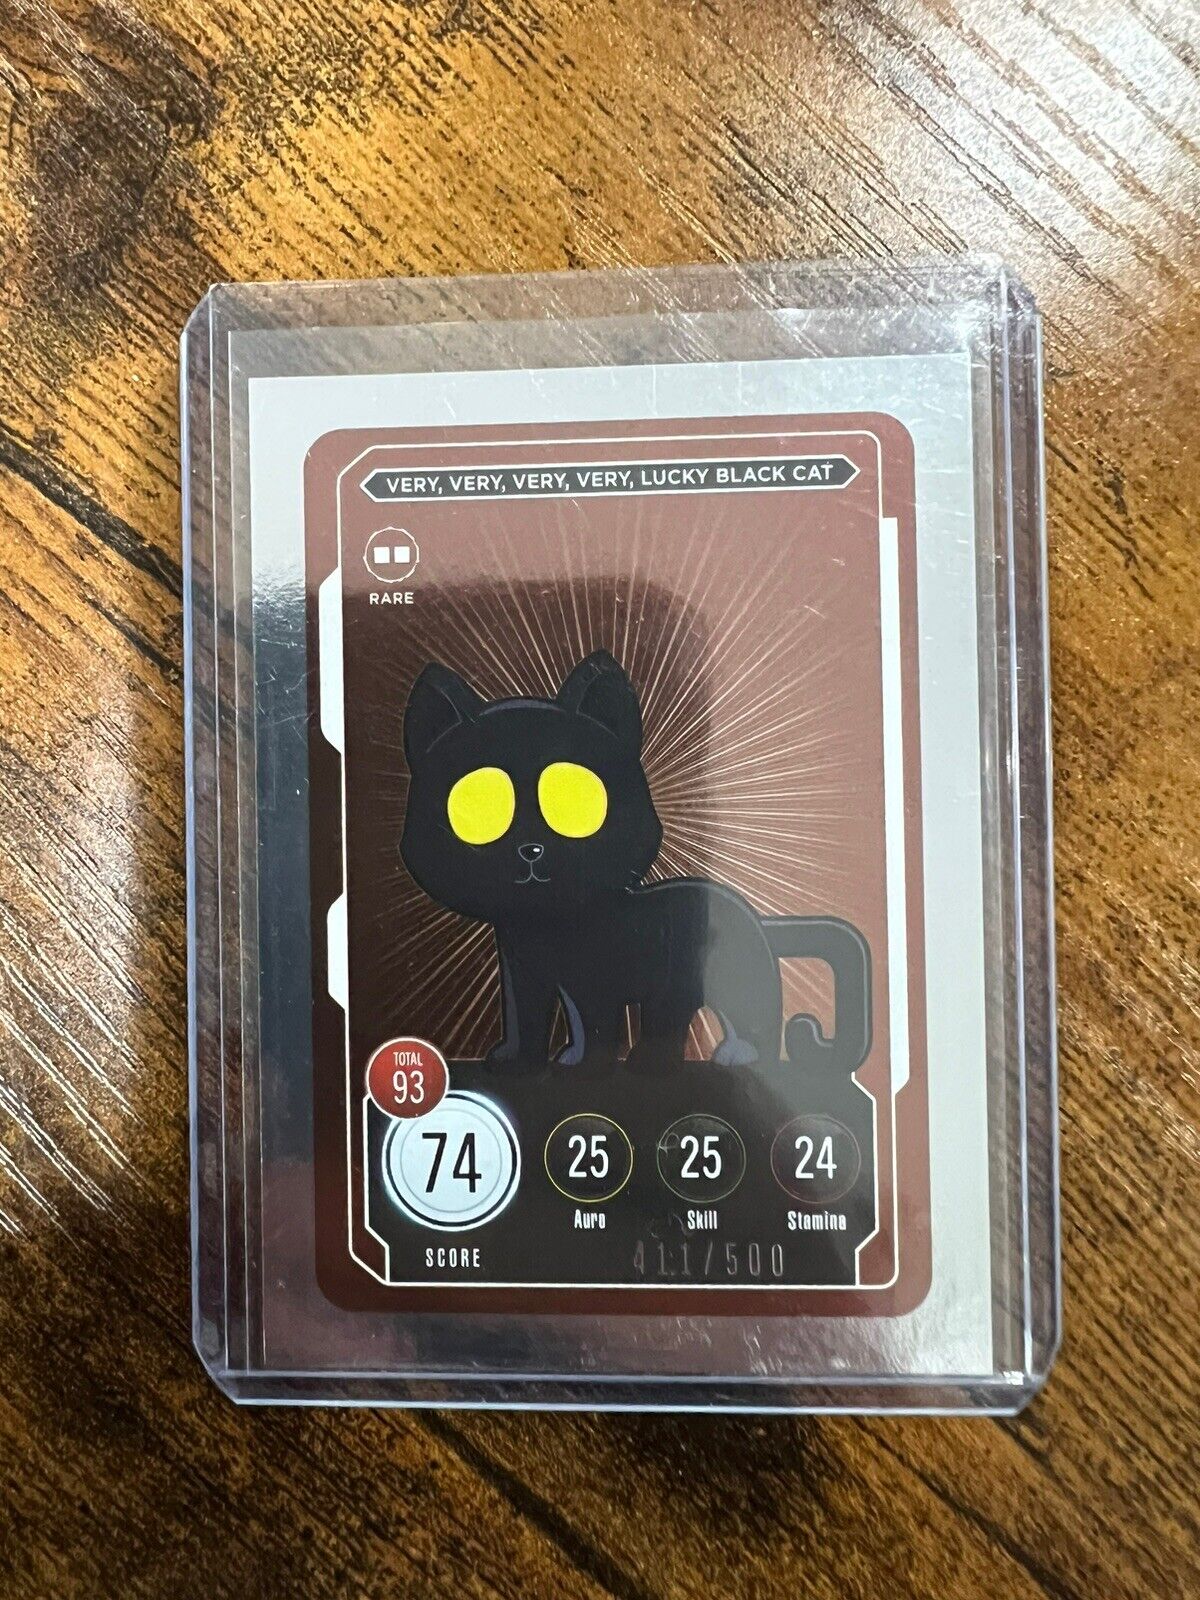 Rare Very Very Very Lucky Black Cat, Compete and Collect Veefriends